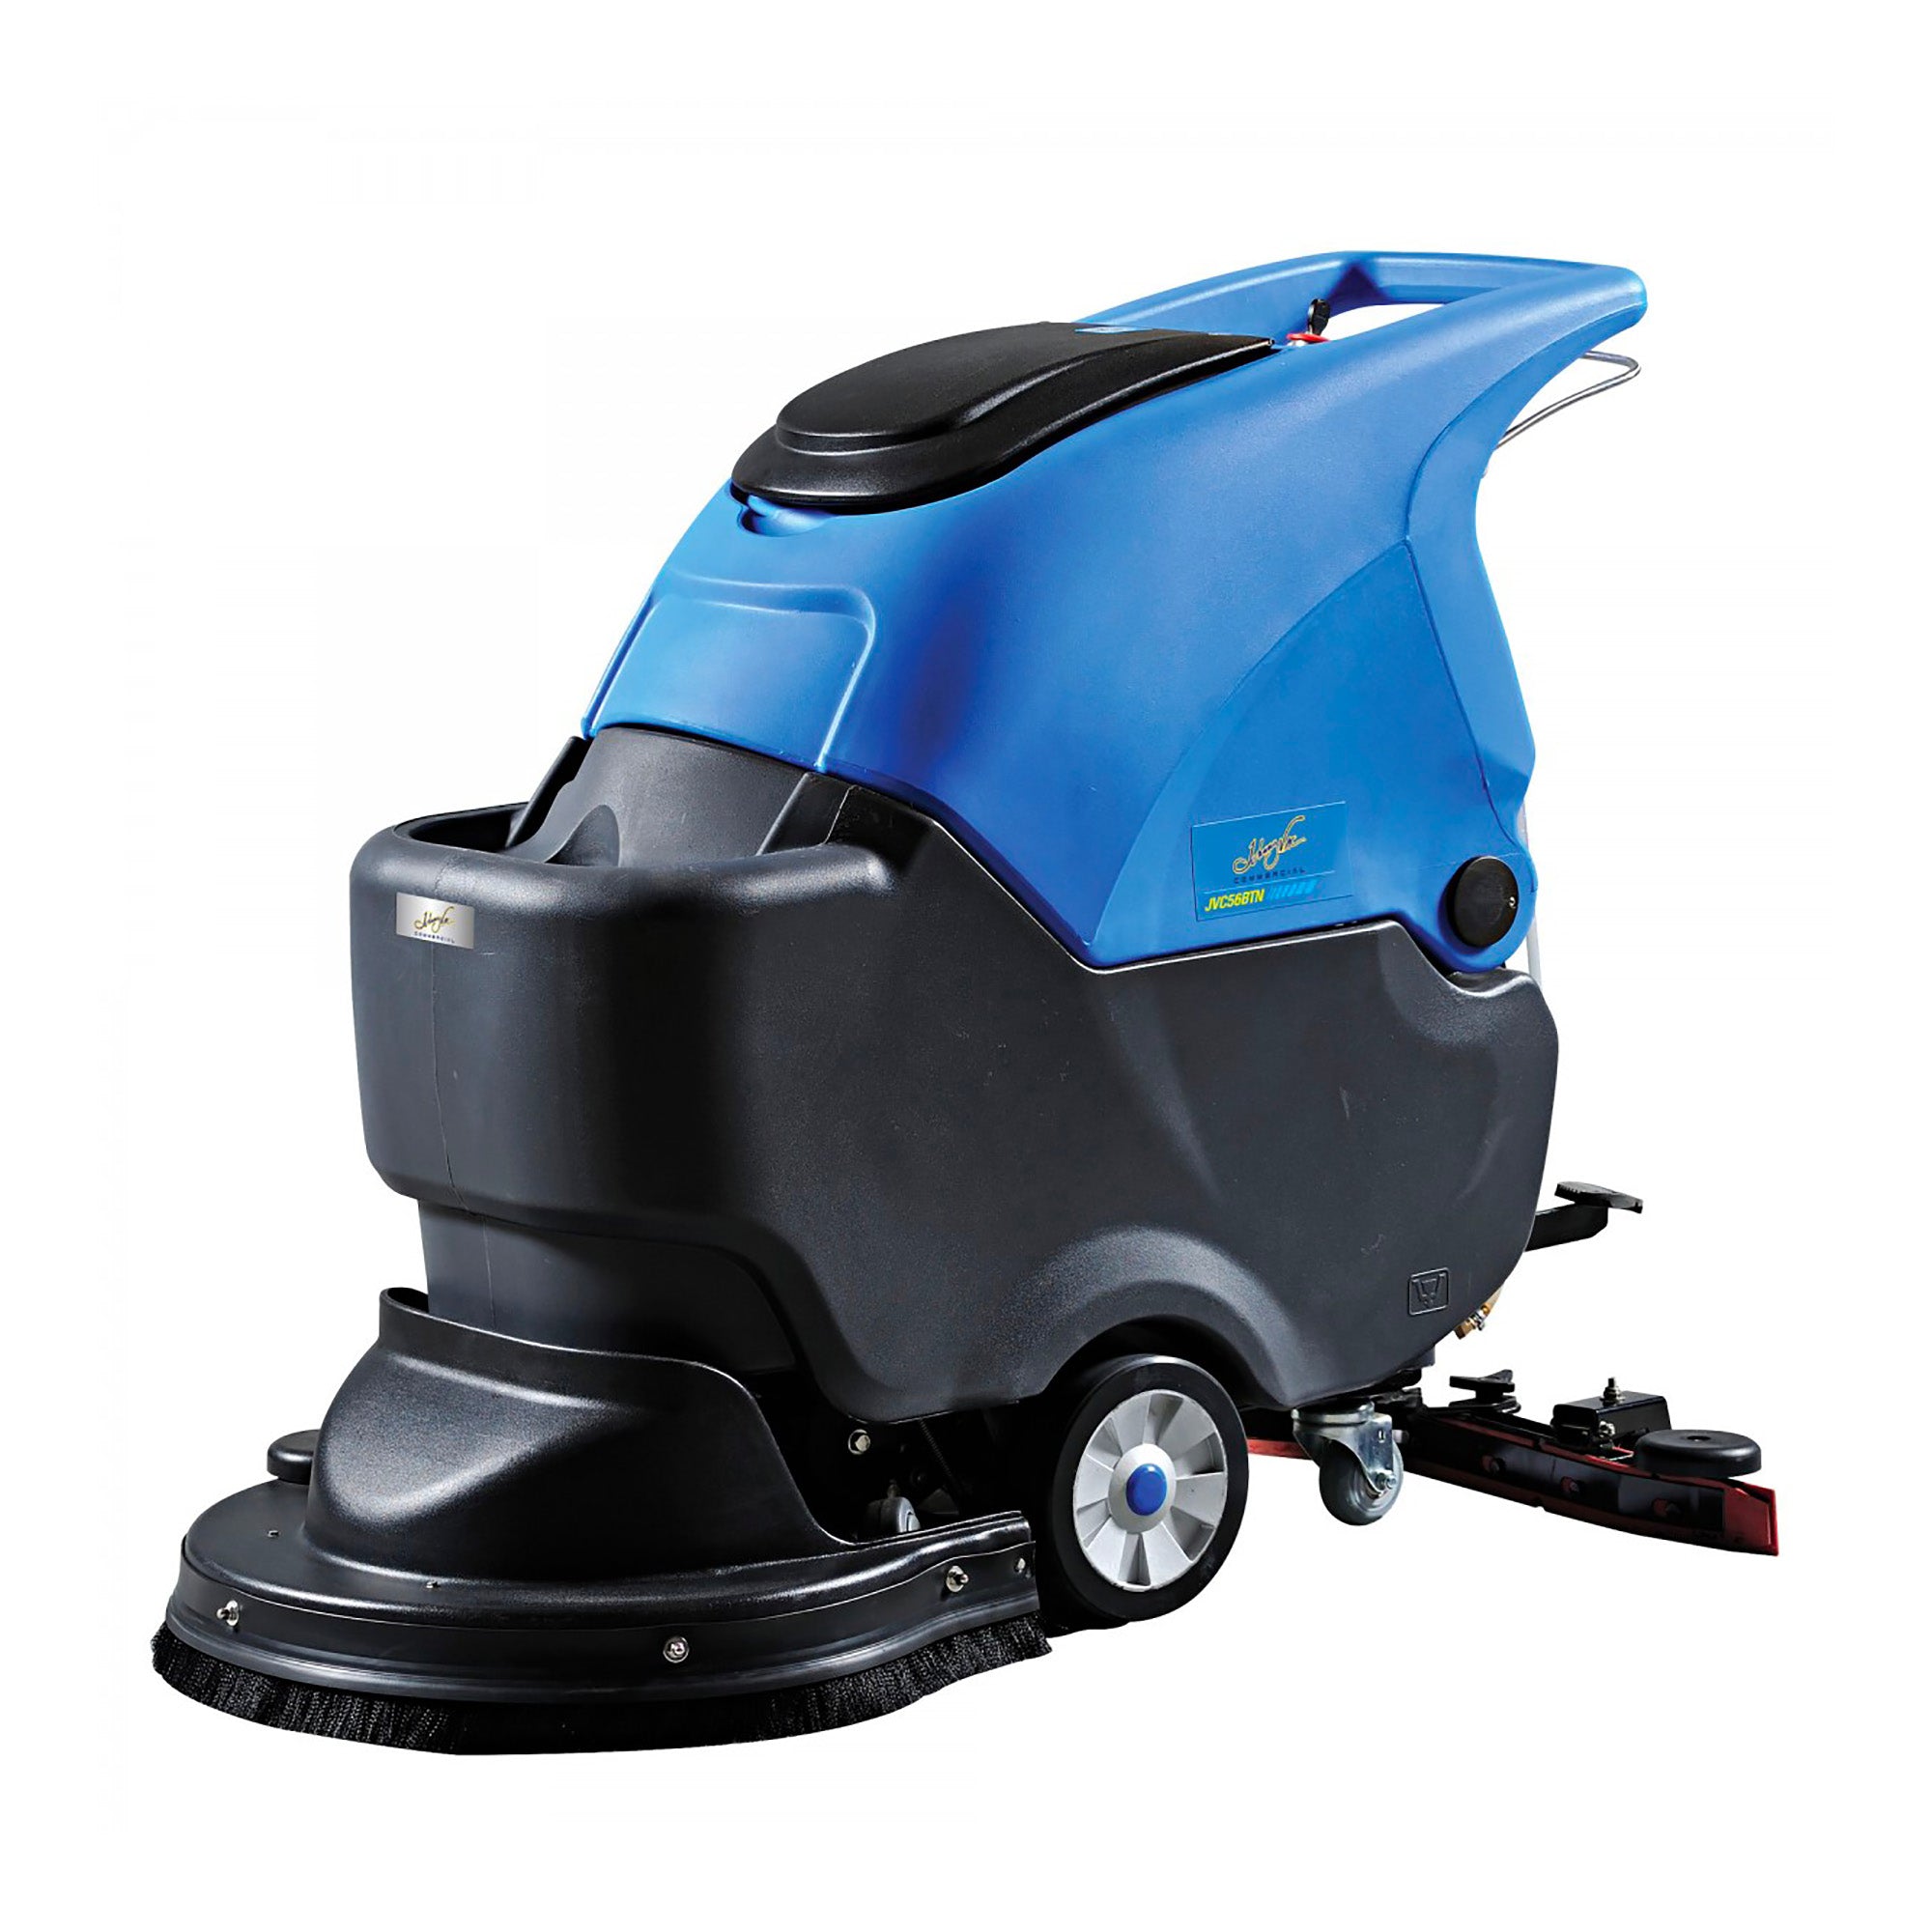 Johnny Vac JVE56BTN Autoscrubber with Traction and 22" Cleaning Path